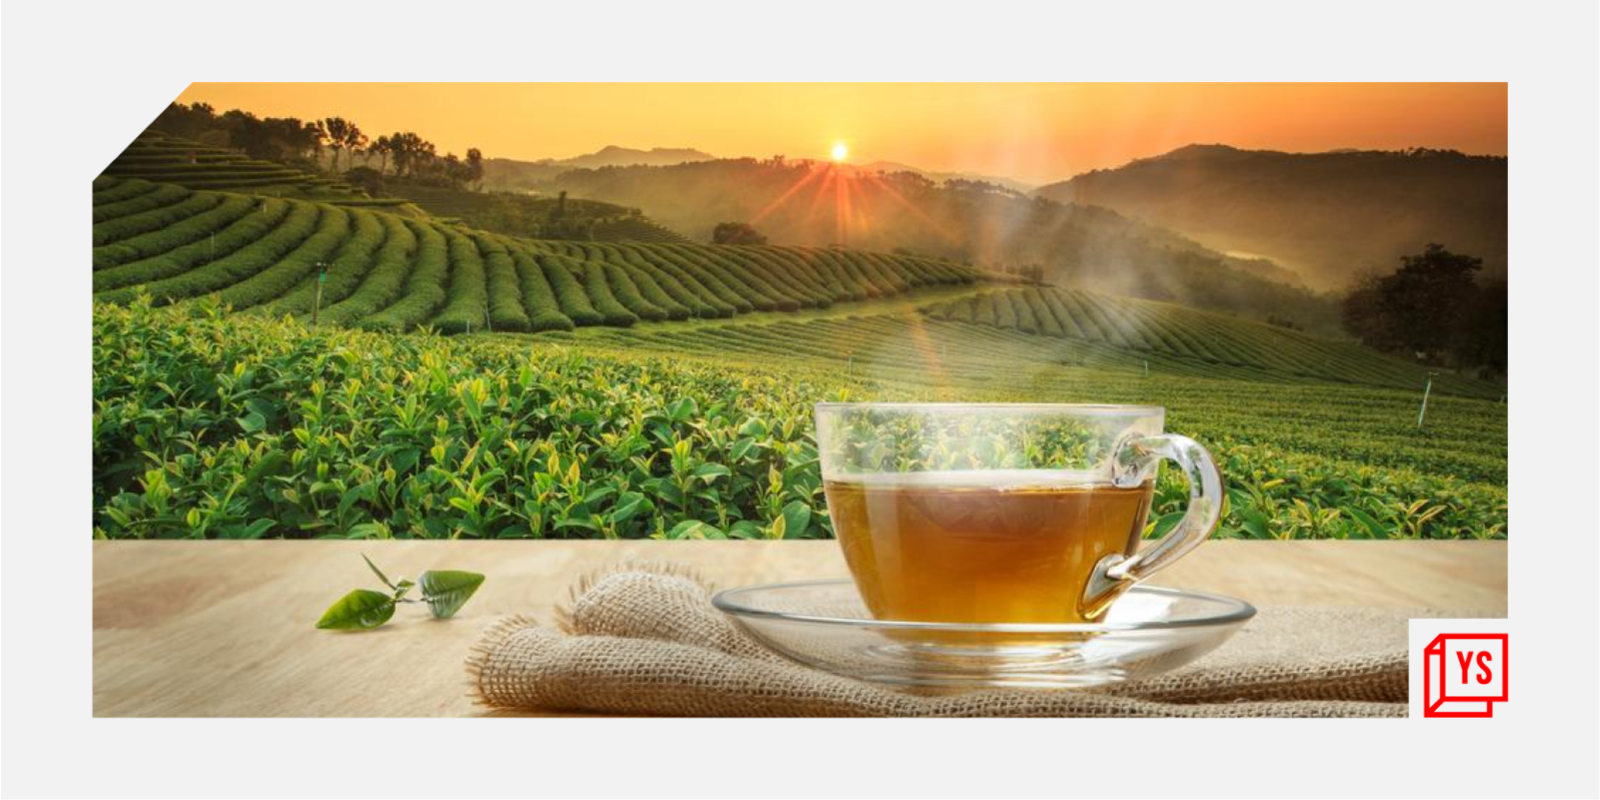 How startups are helping India’s age-old tea industry brew up new trends

